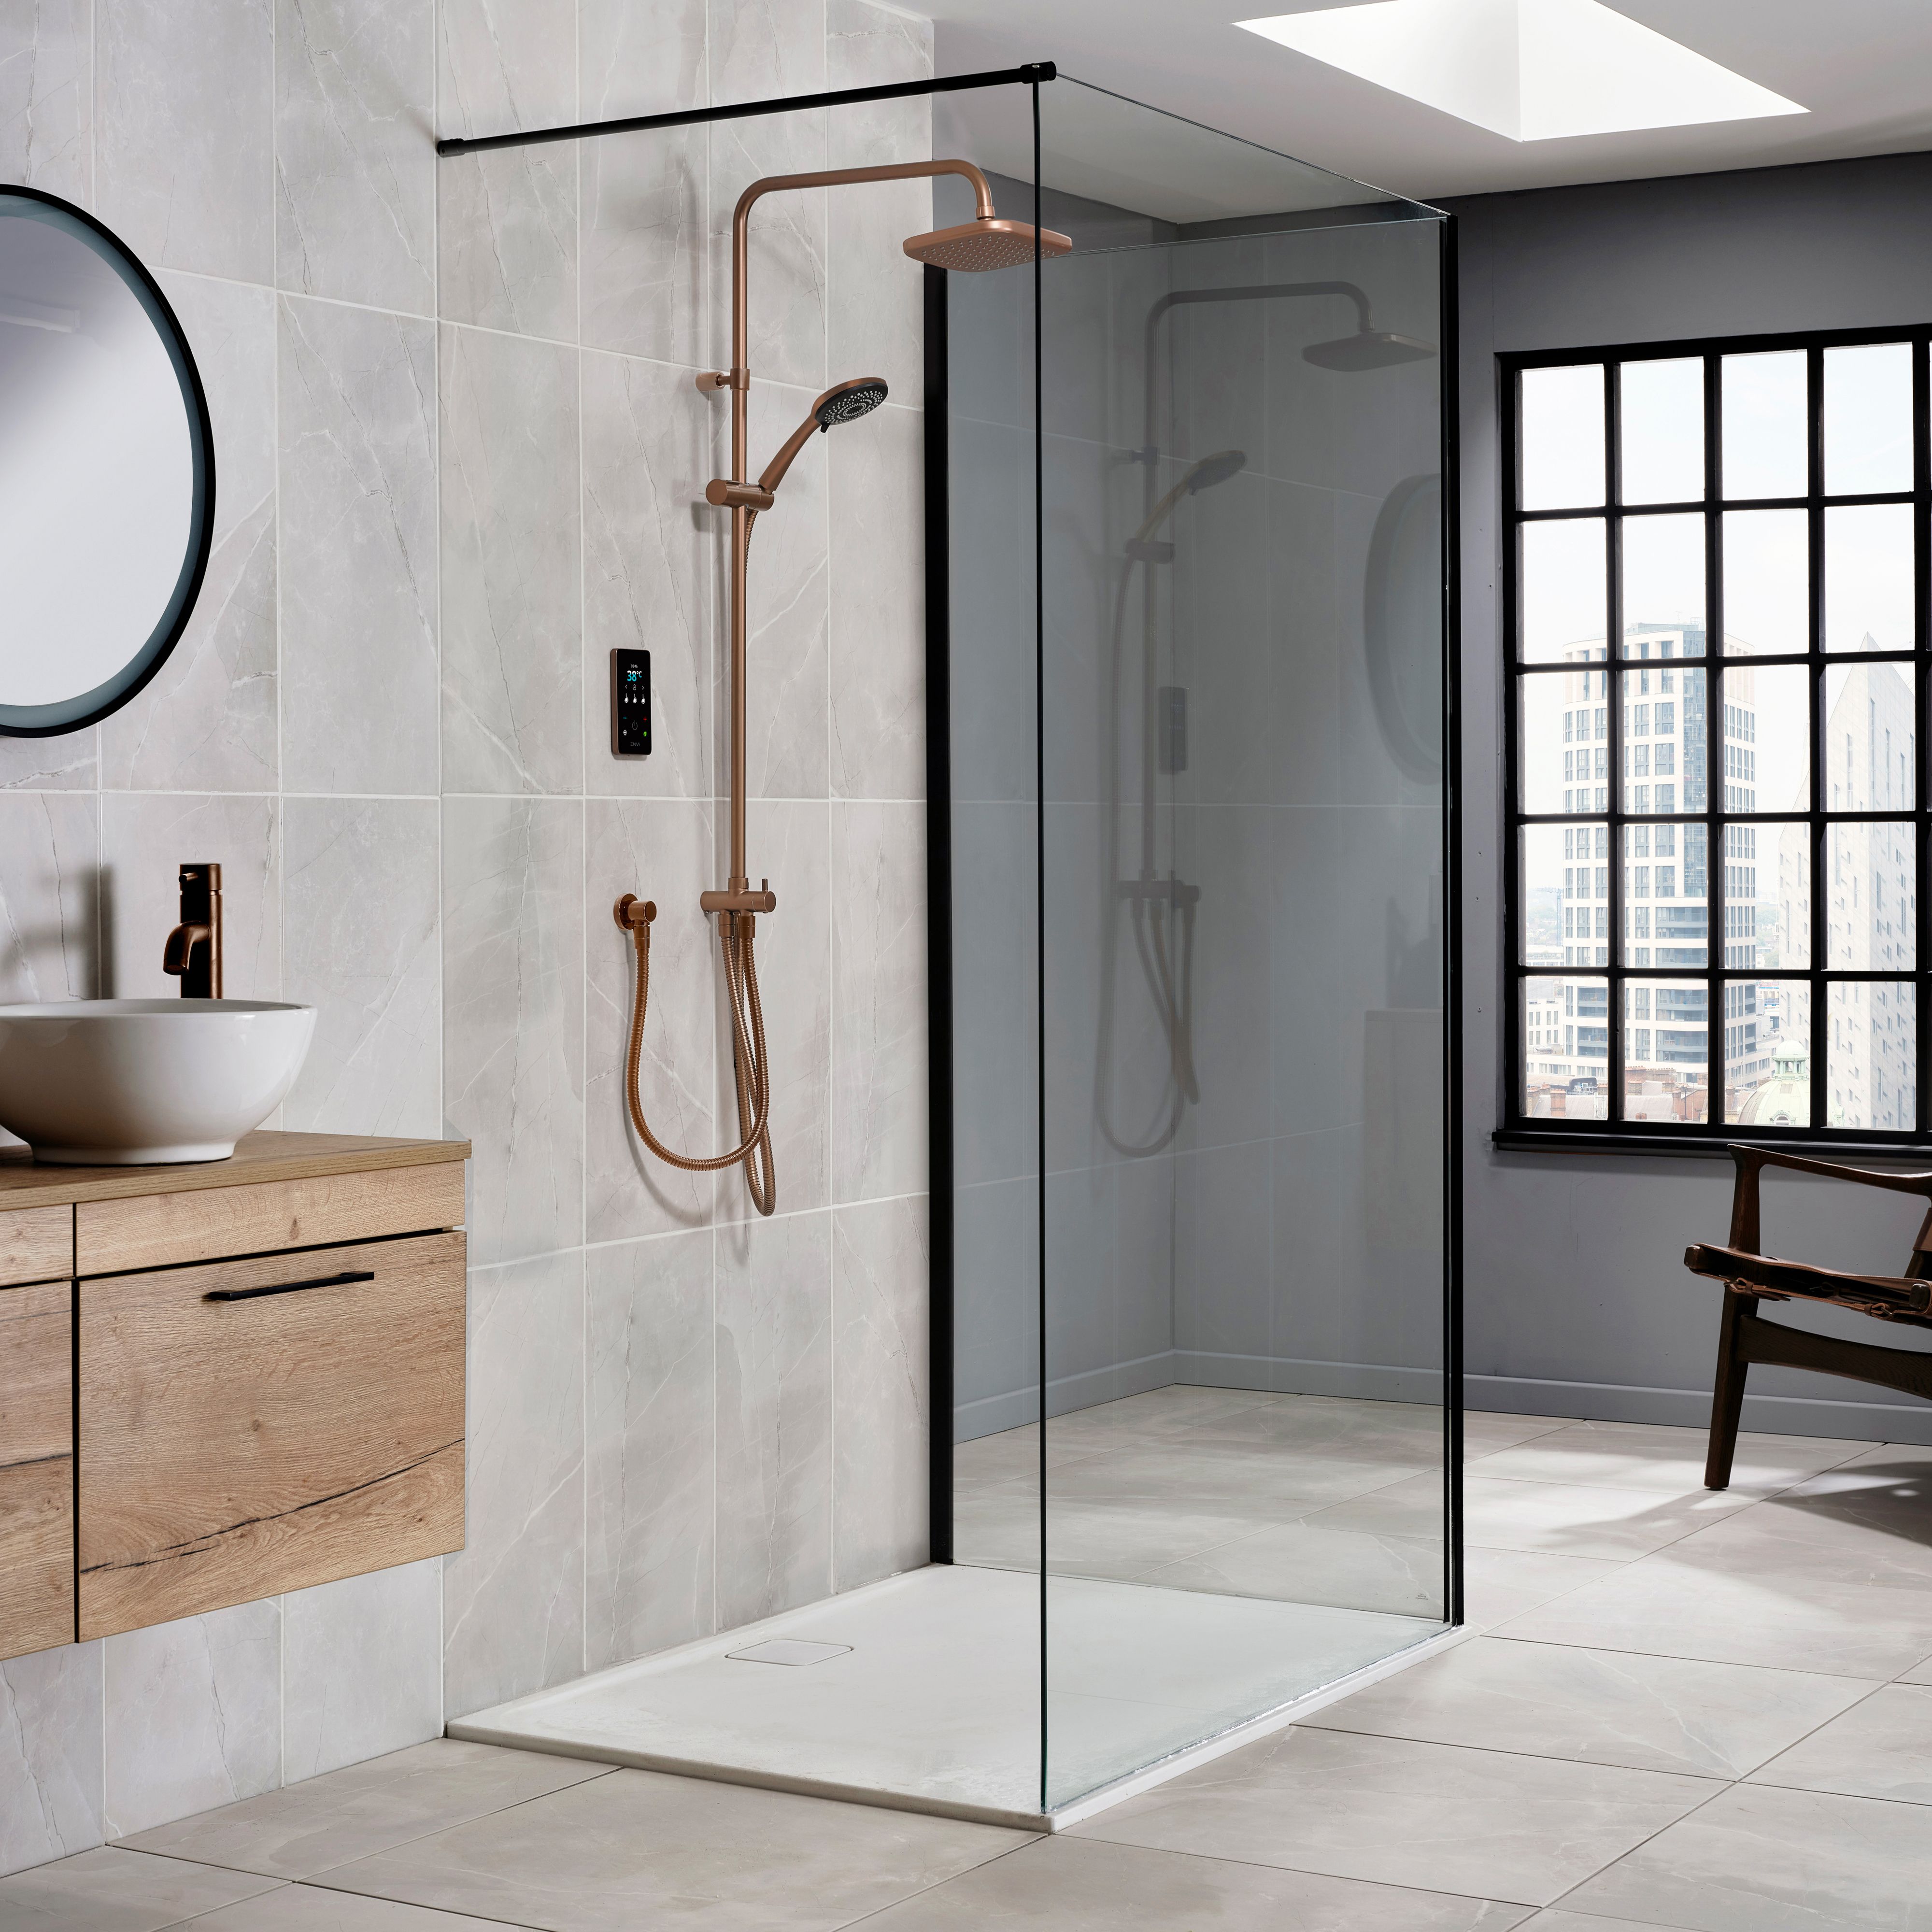 Triton Gloss Copper effect Thermostatic Electric Shower, 9kW